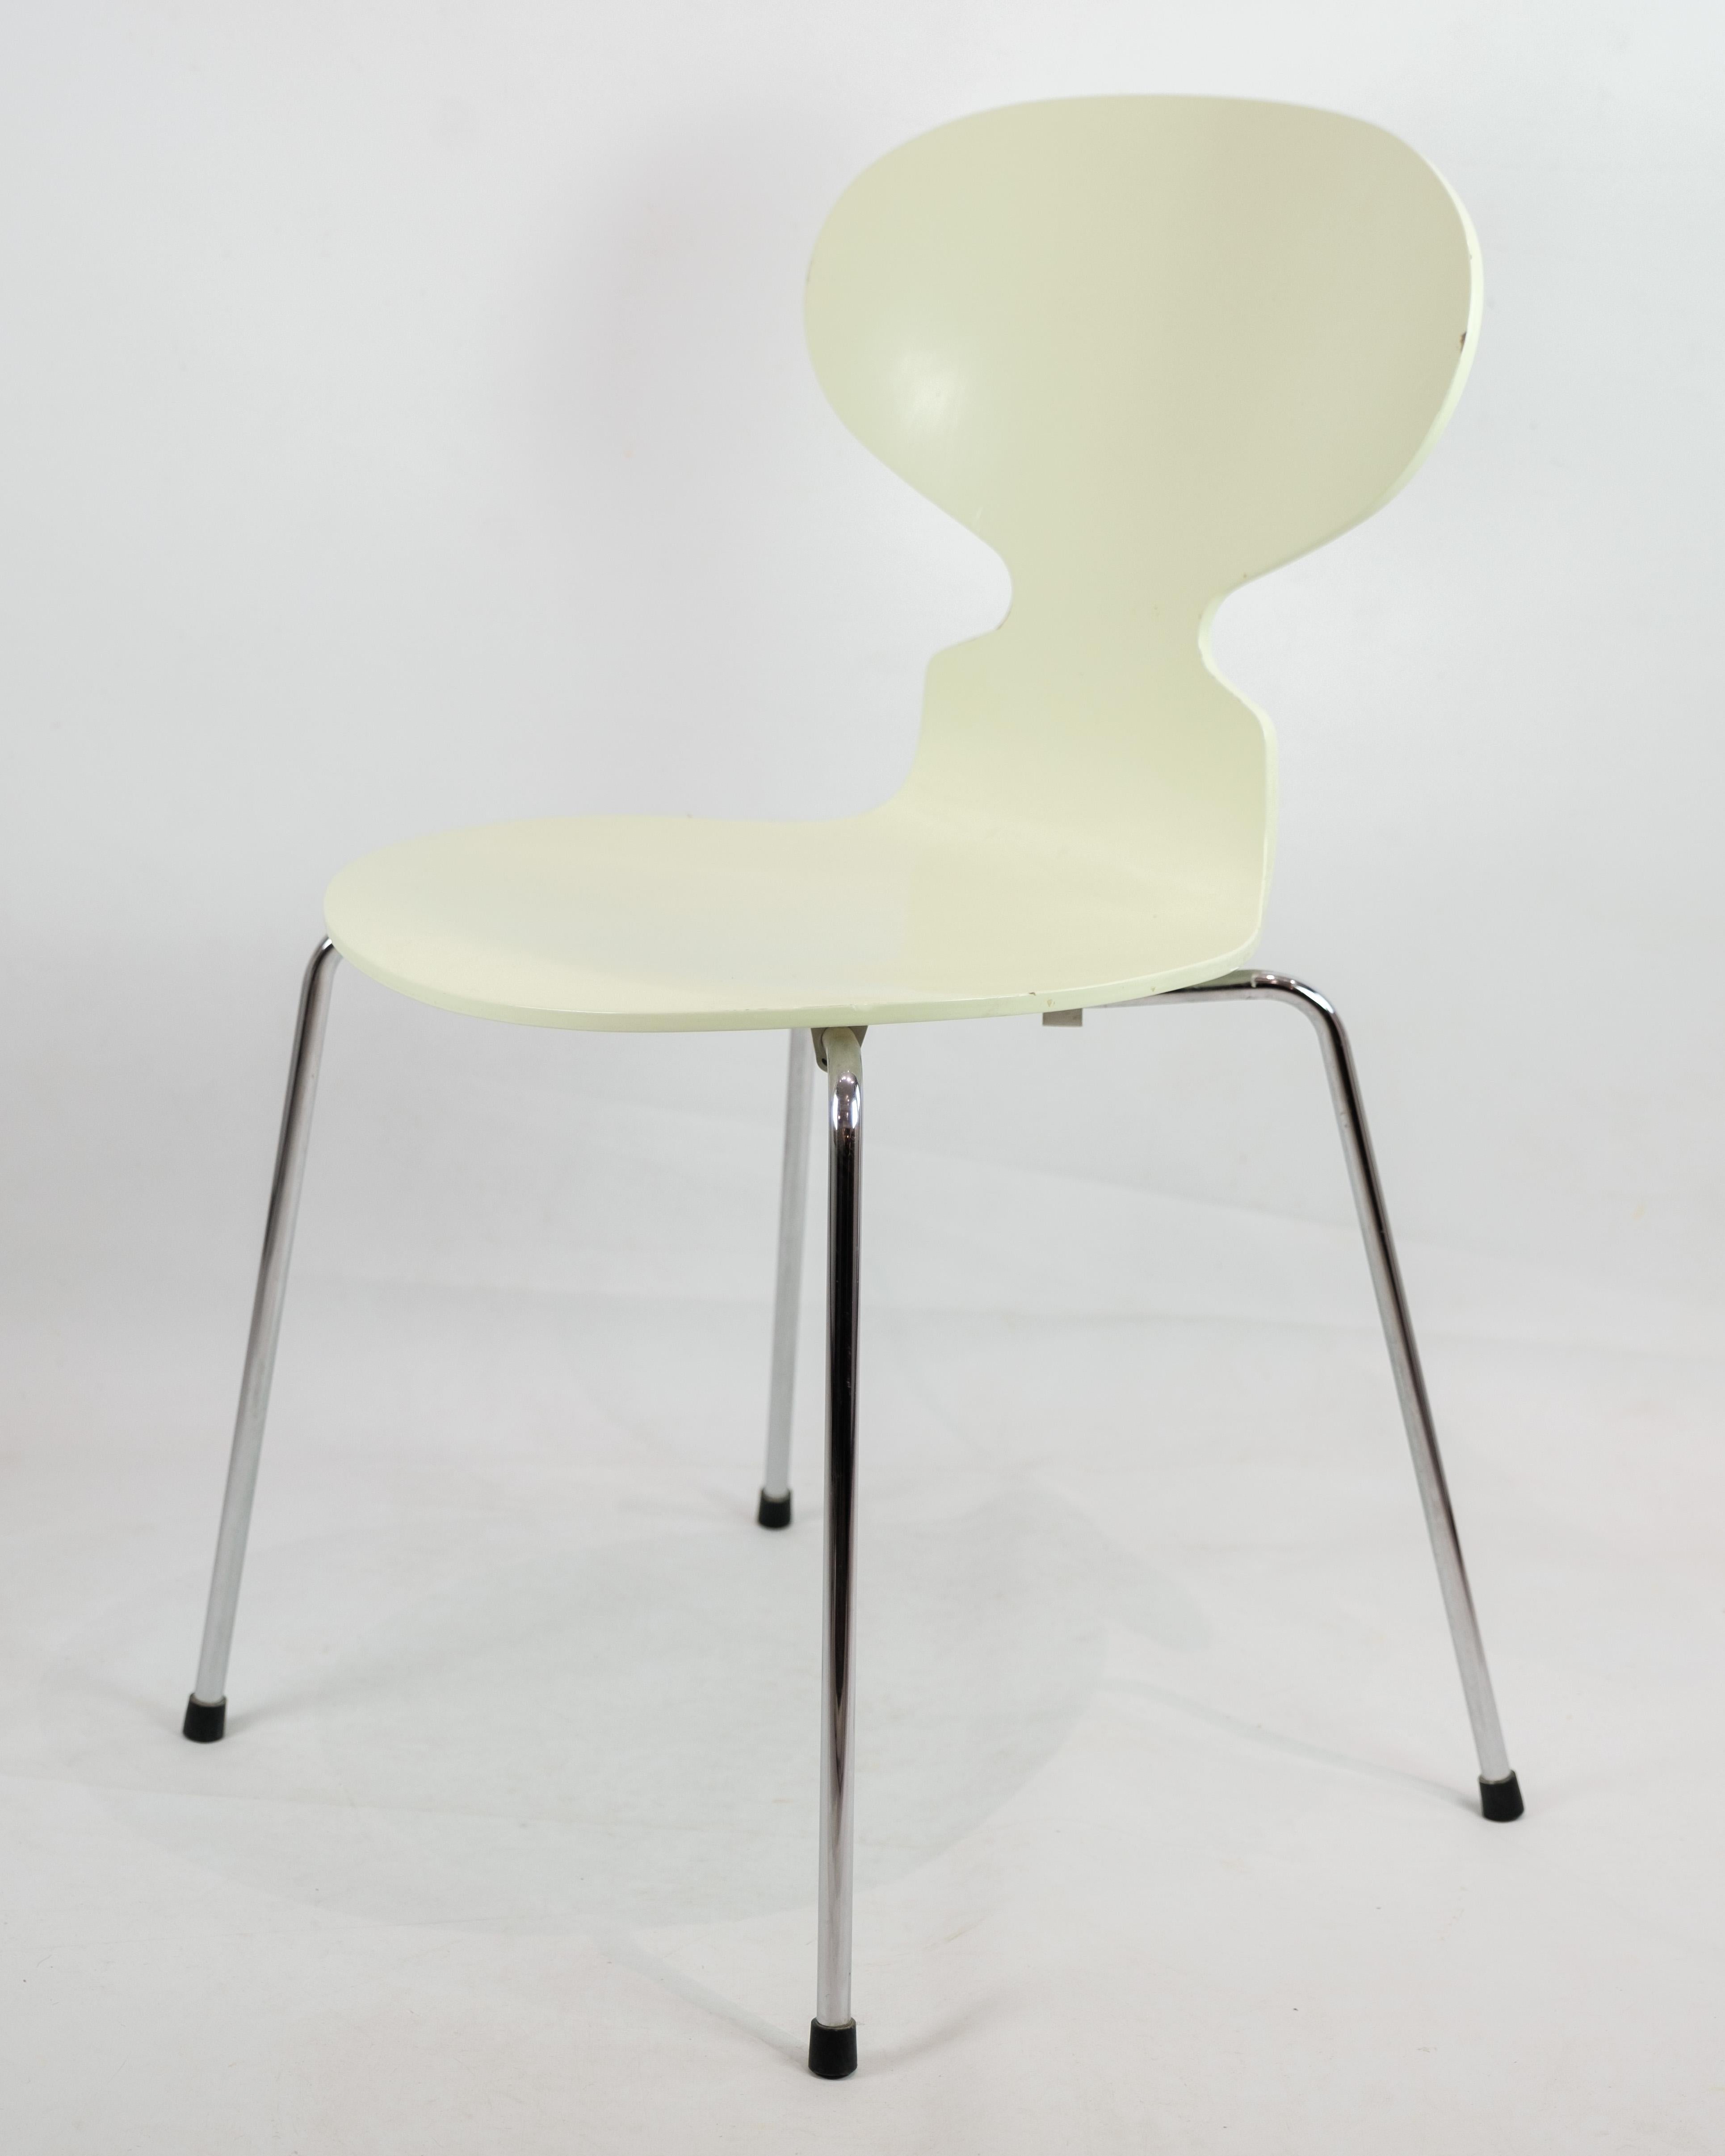 Danish Original Ant Chairs Model 3101 In Pastel Green By Arne Jacobsen From 1970s For Sale